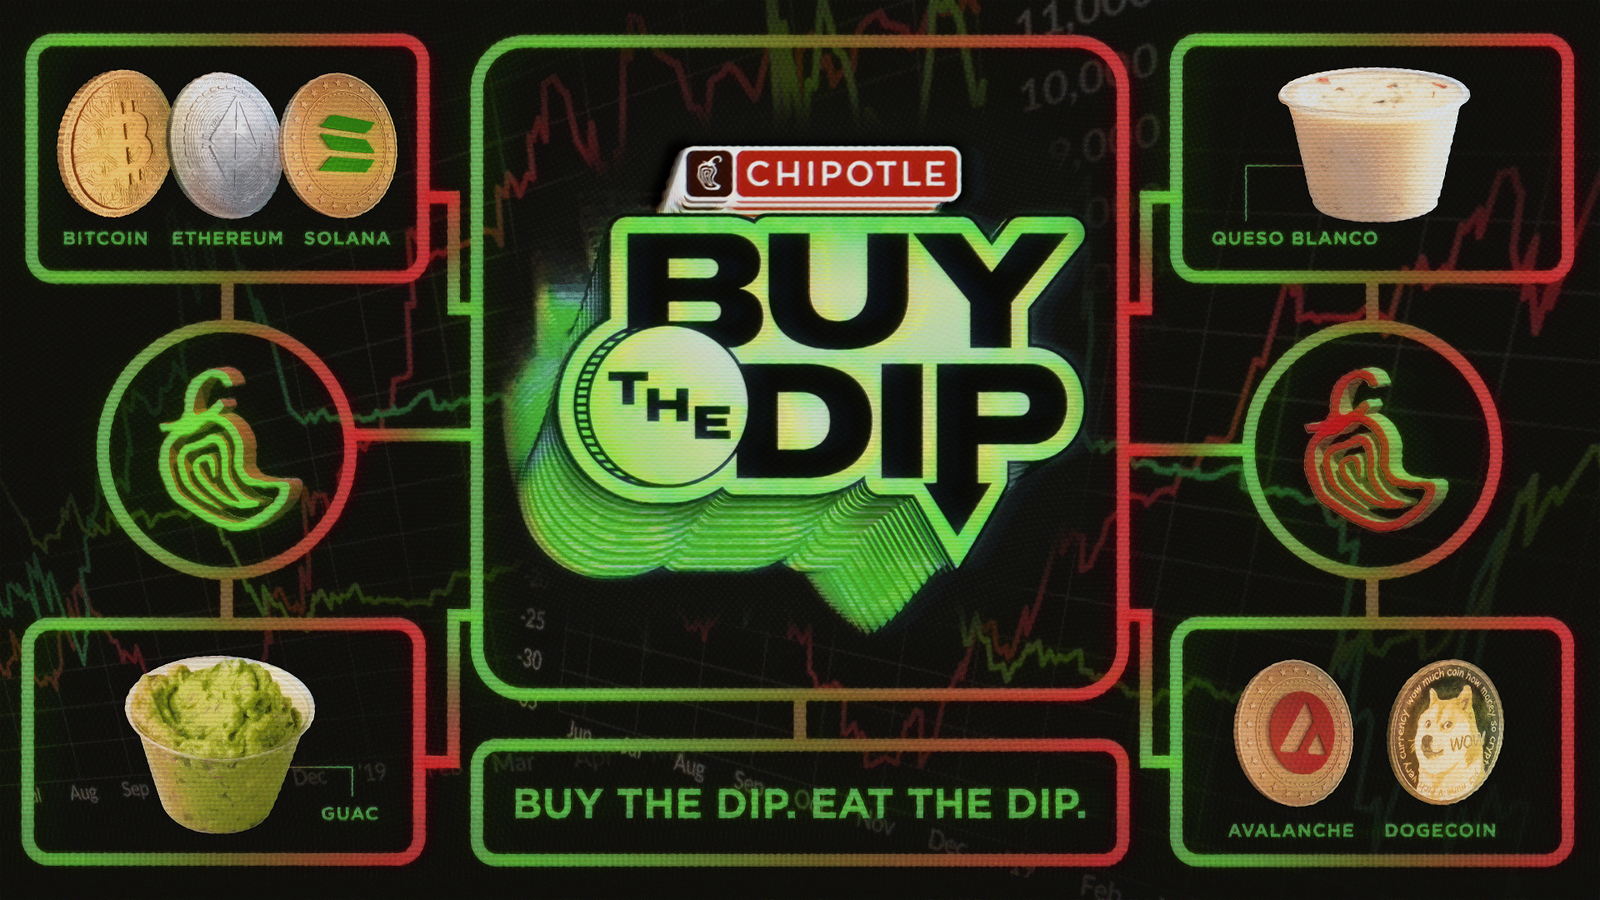 A Chipotle Mexican Grill advertisement promoting its "Buy the Dip" web-based stock market simulator game.